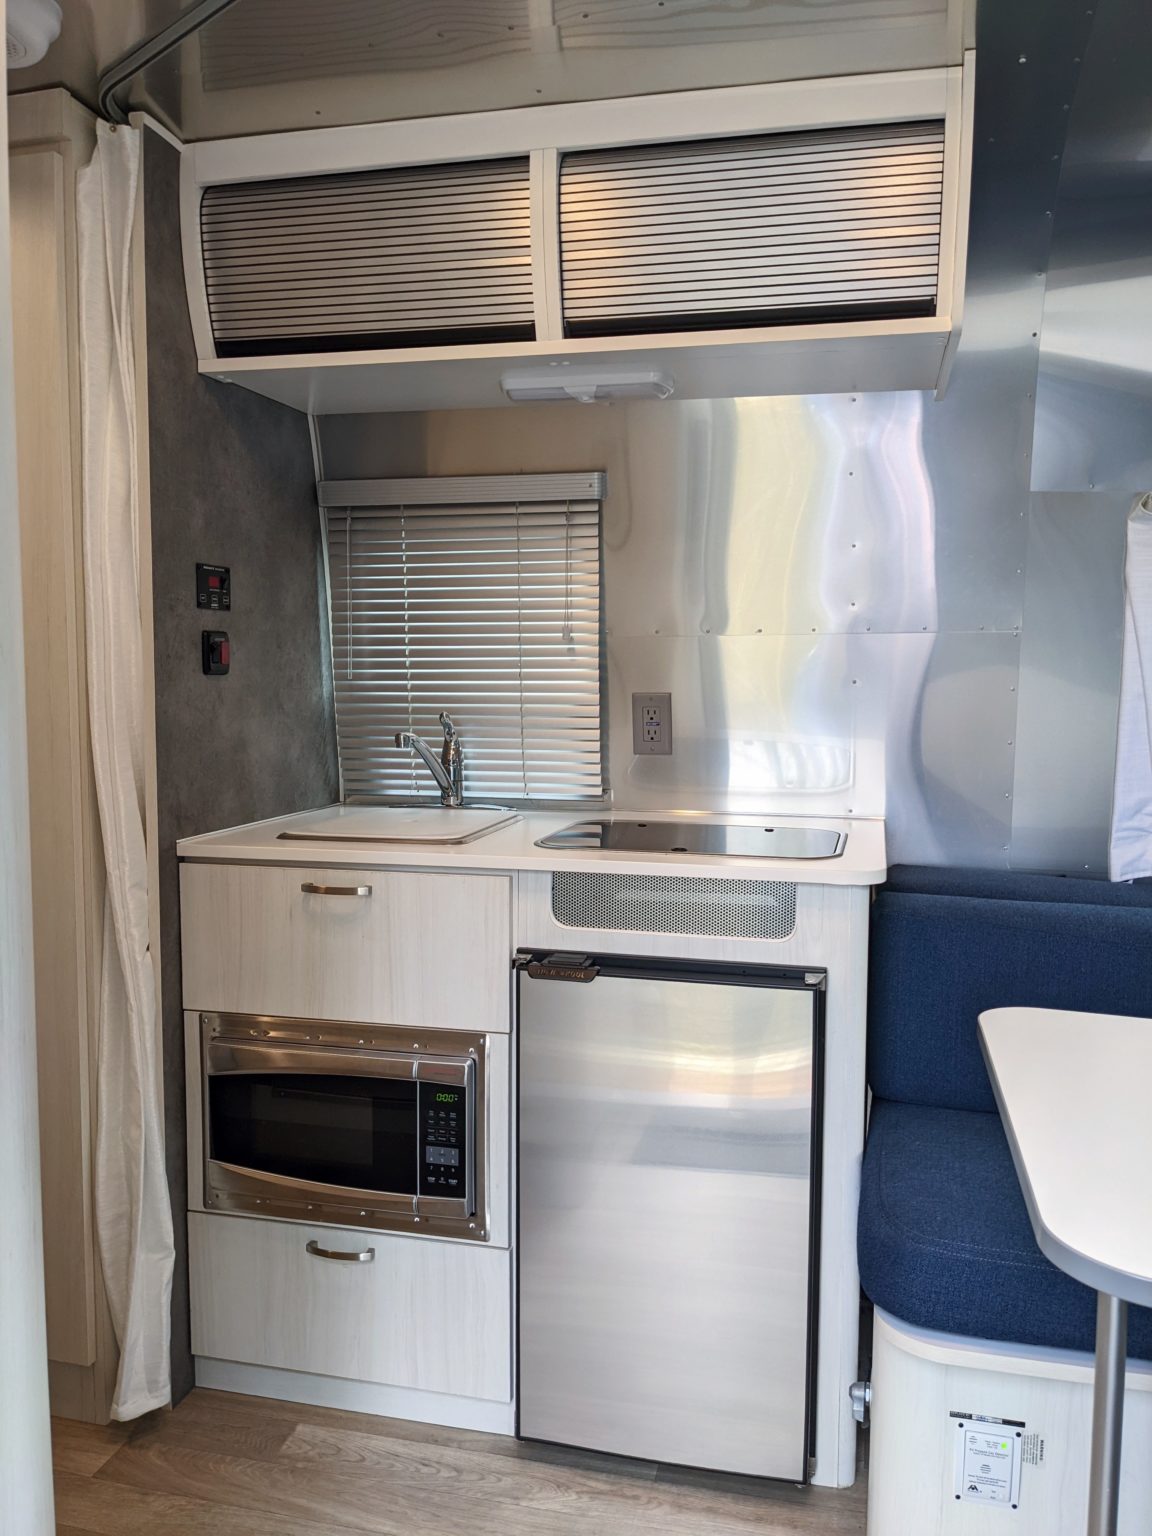 2020 Airstream 16FT Bambi For Sale in Shoreline - Airstream Marketplace